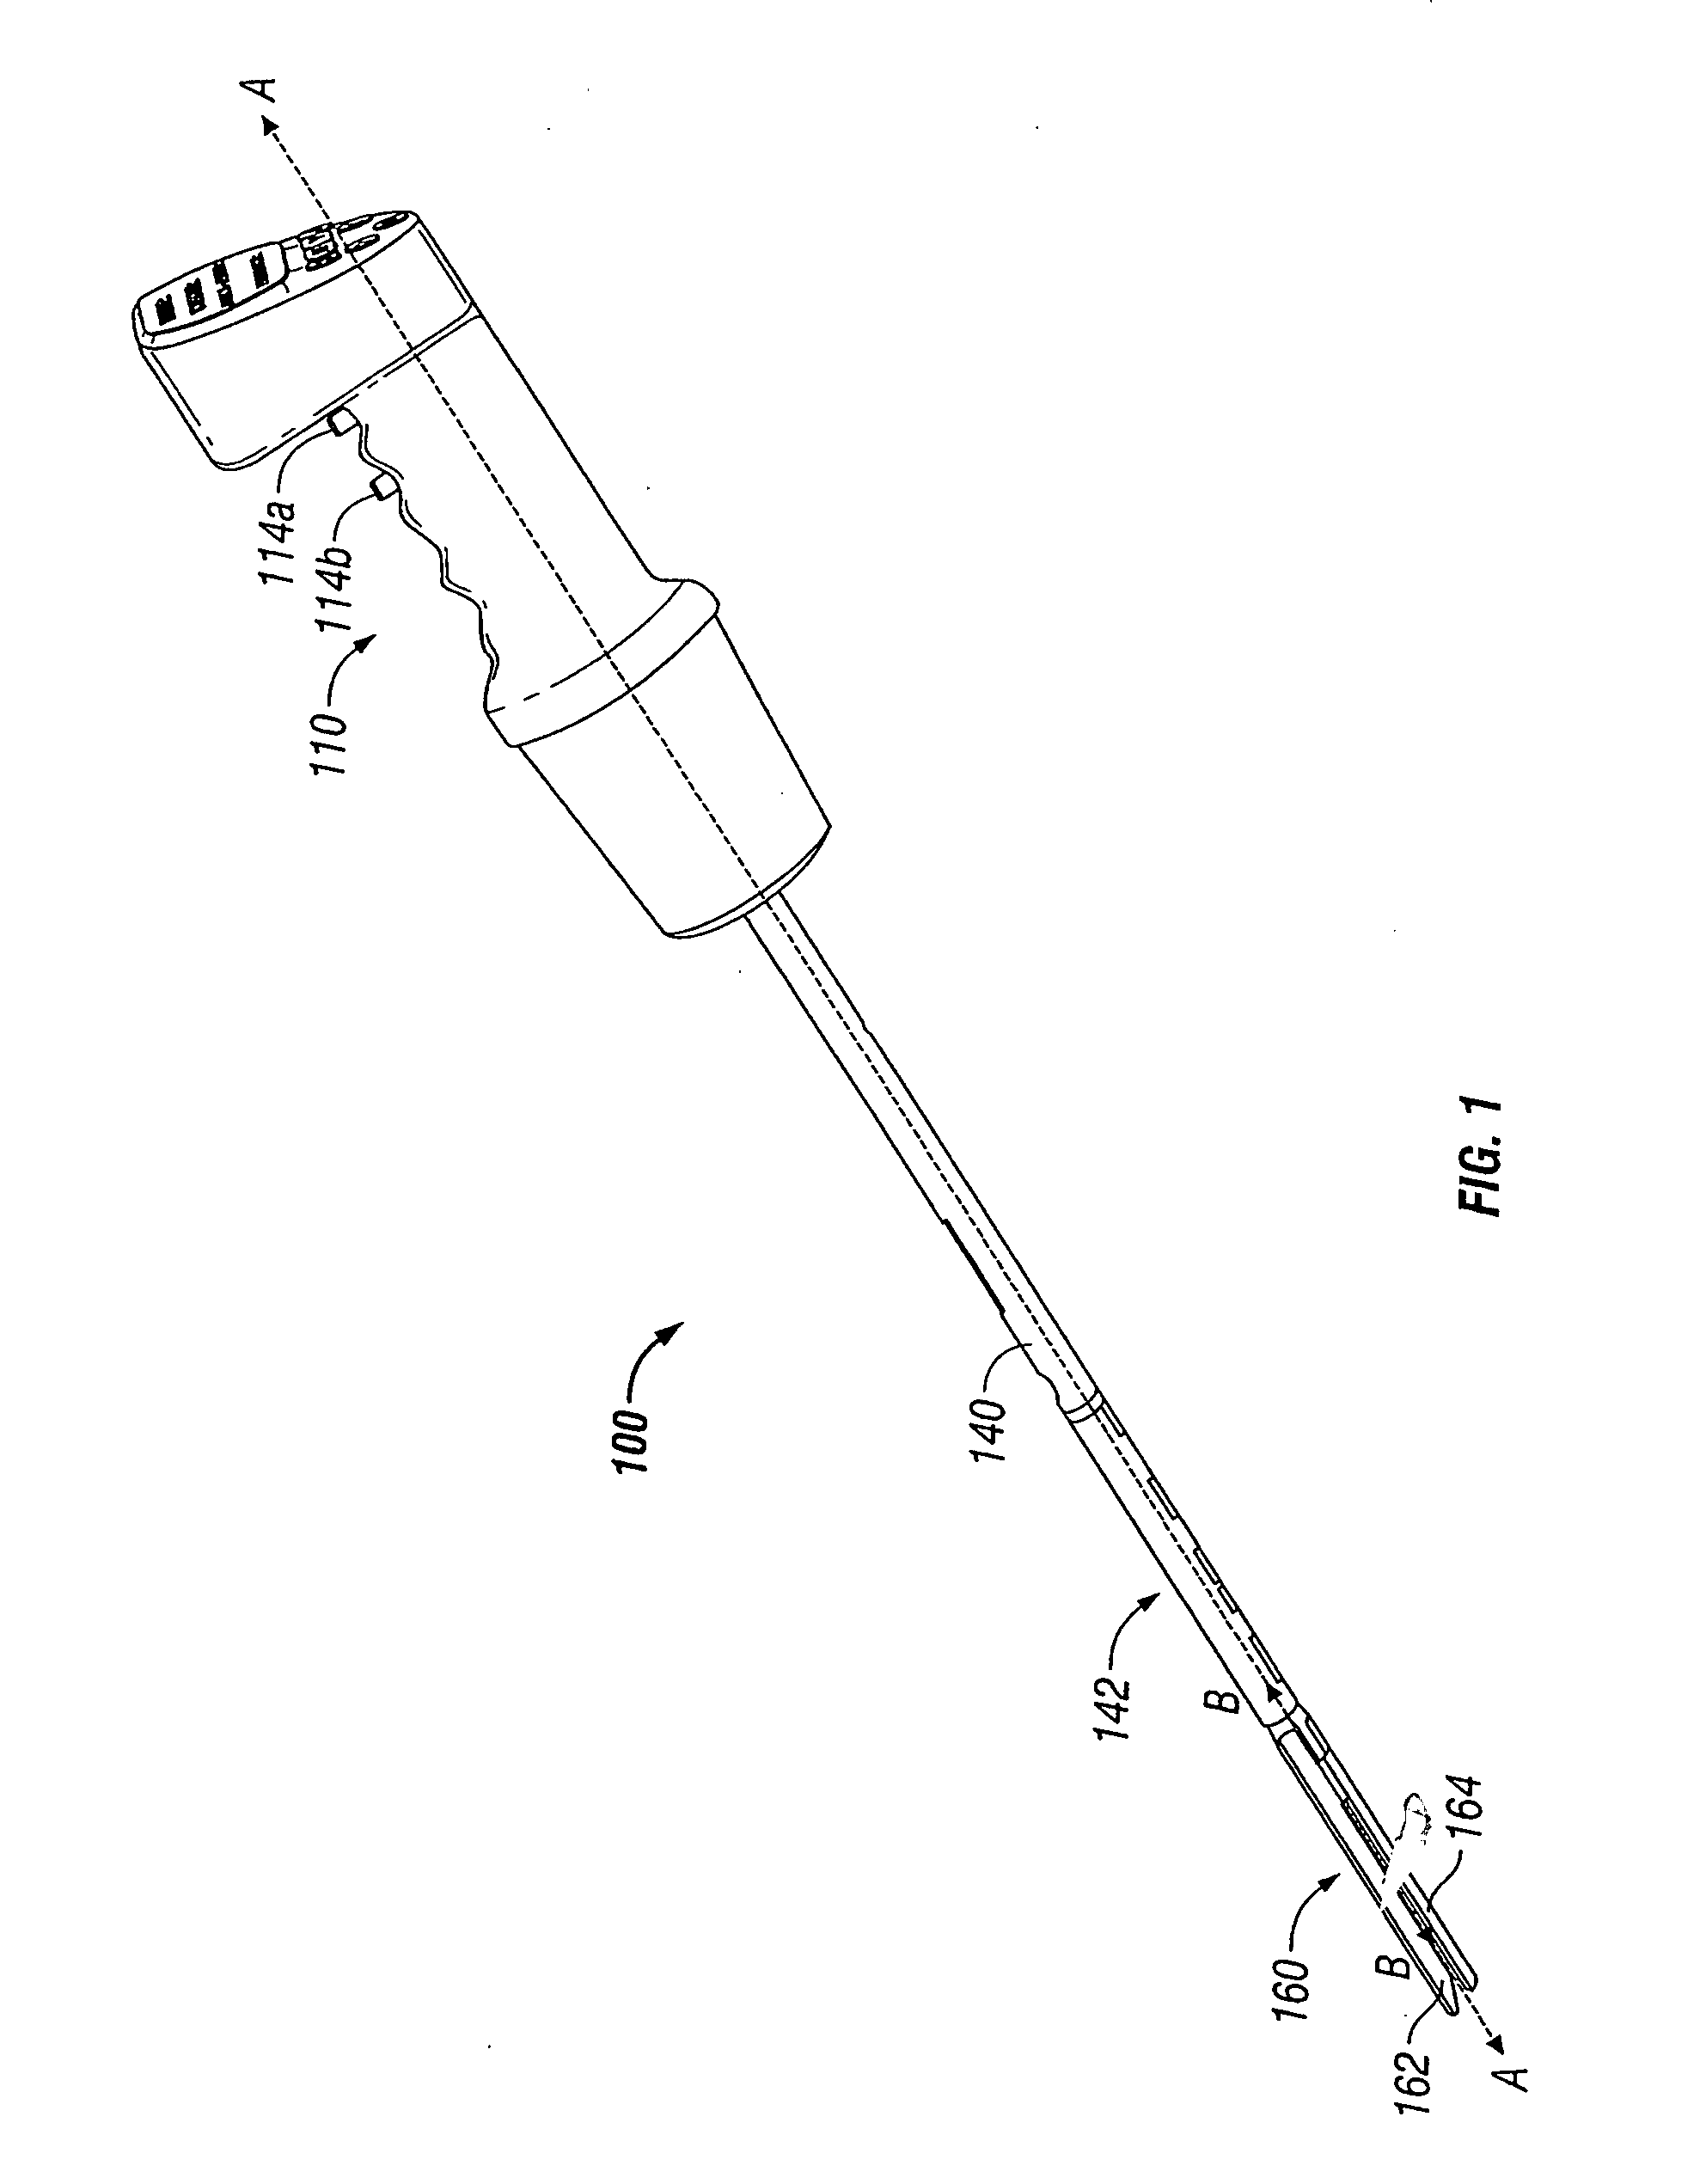 Powered surgical instrument